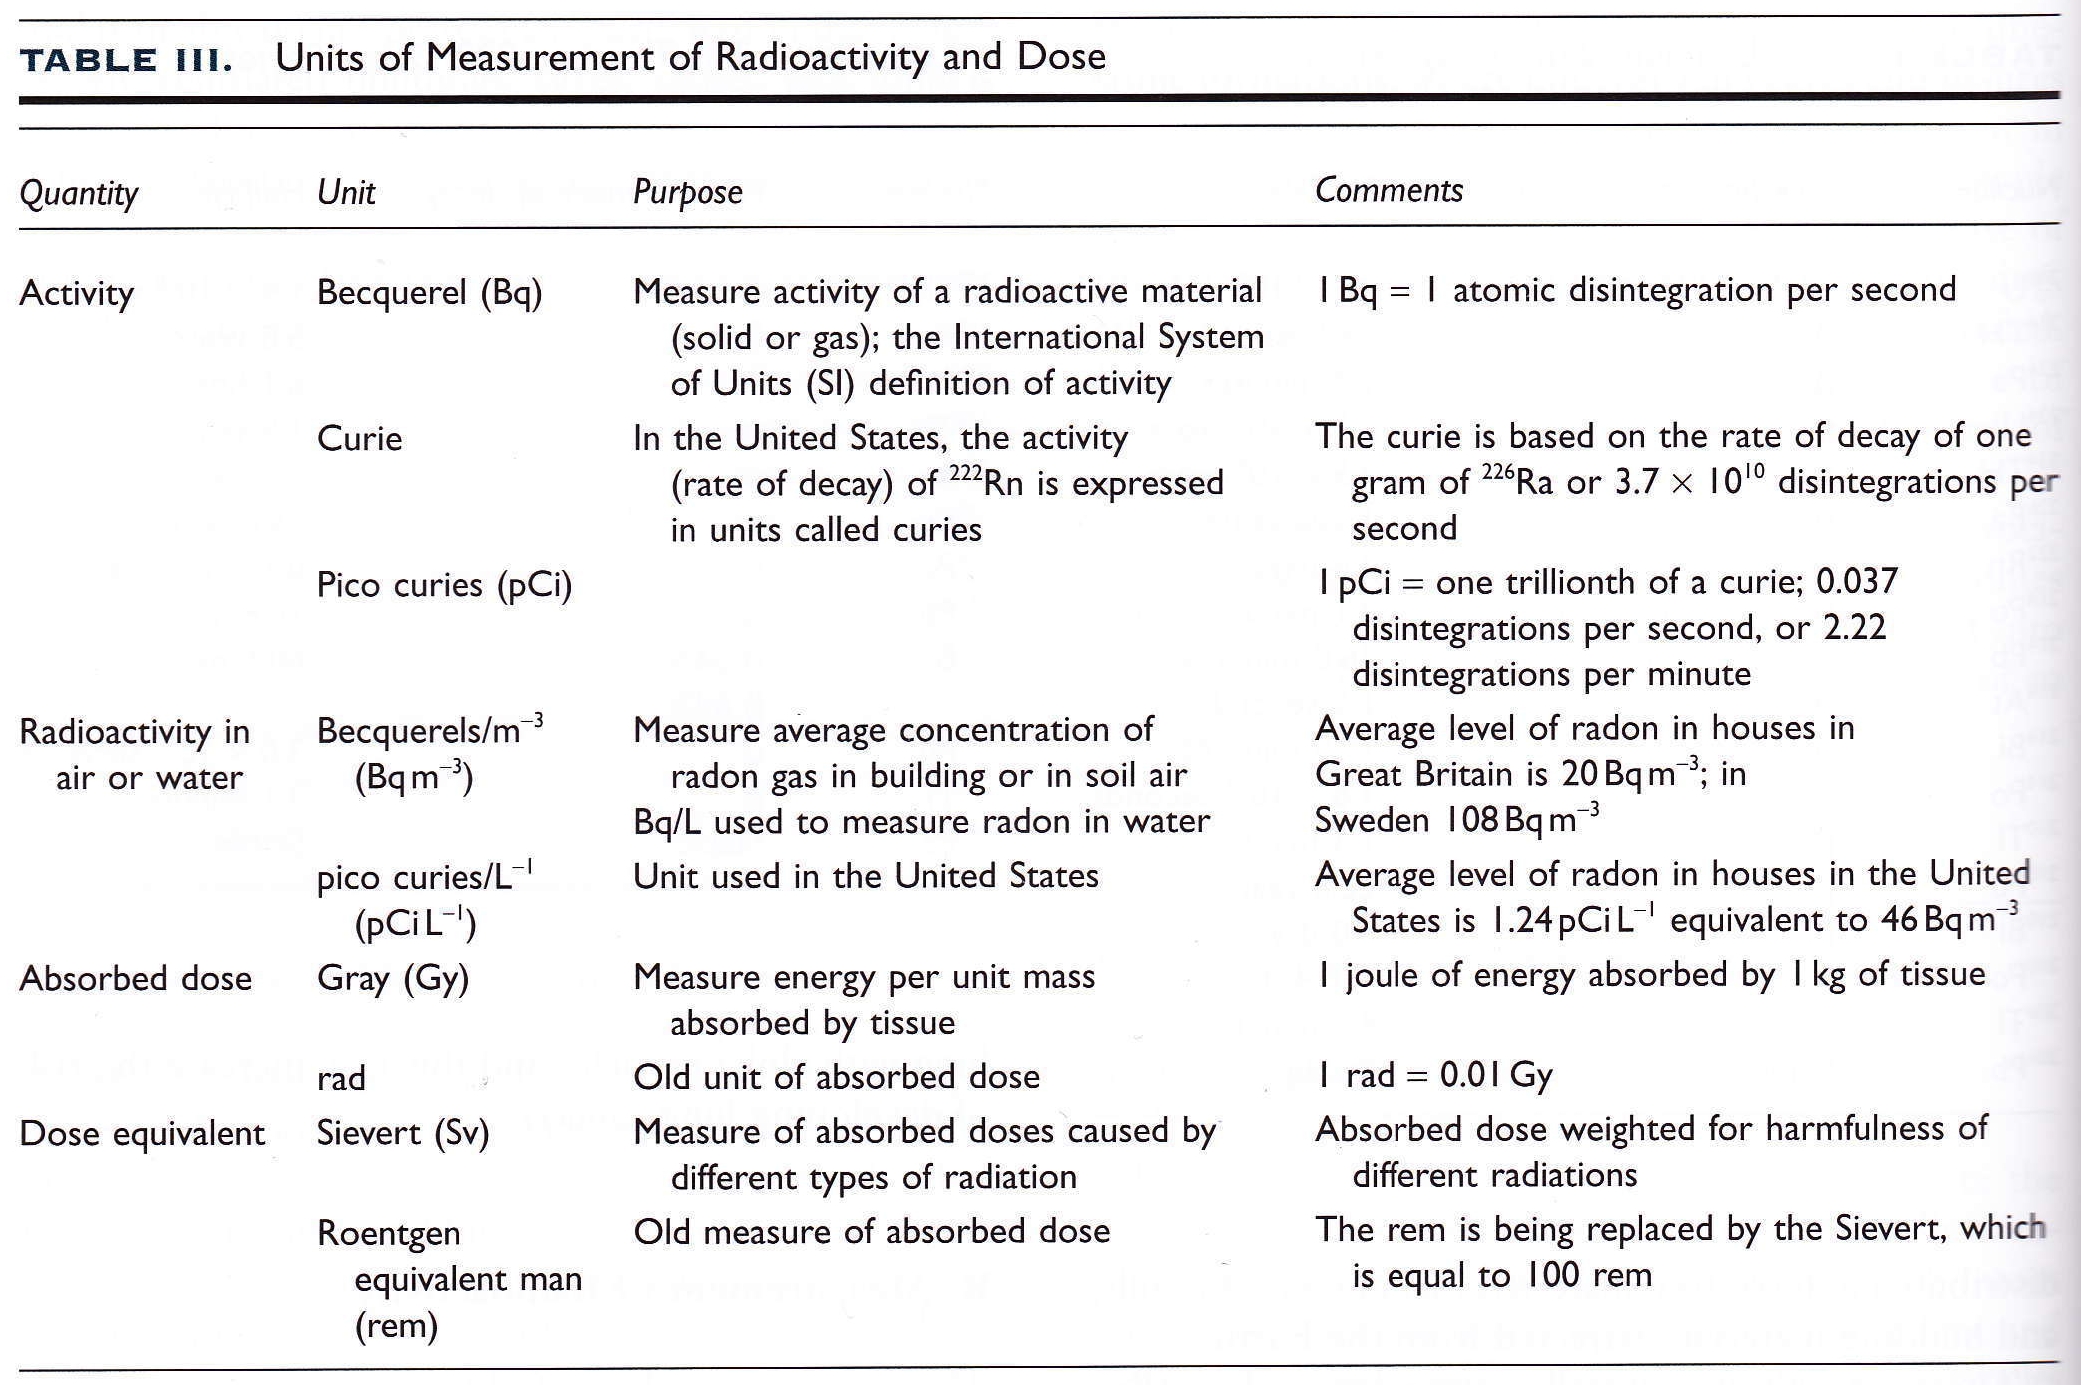 Units of Measurement for Radioactivity and Dose